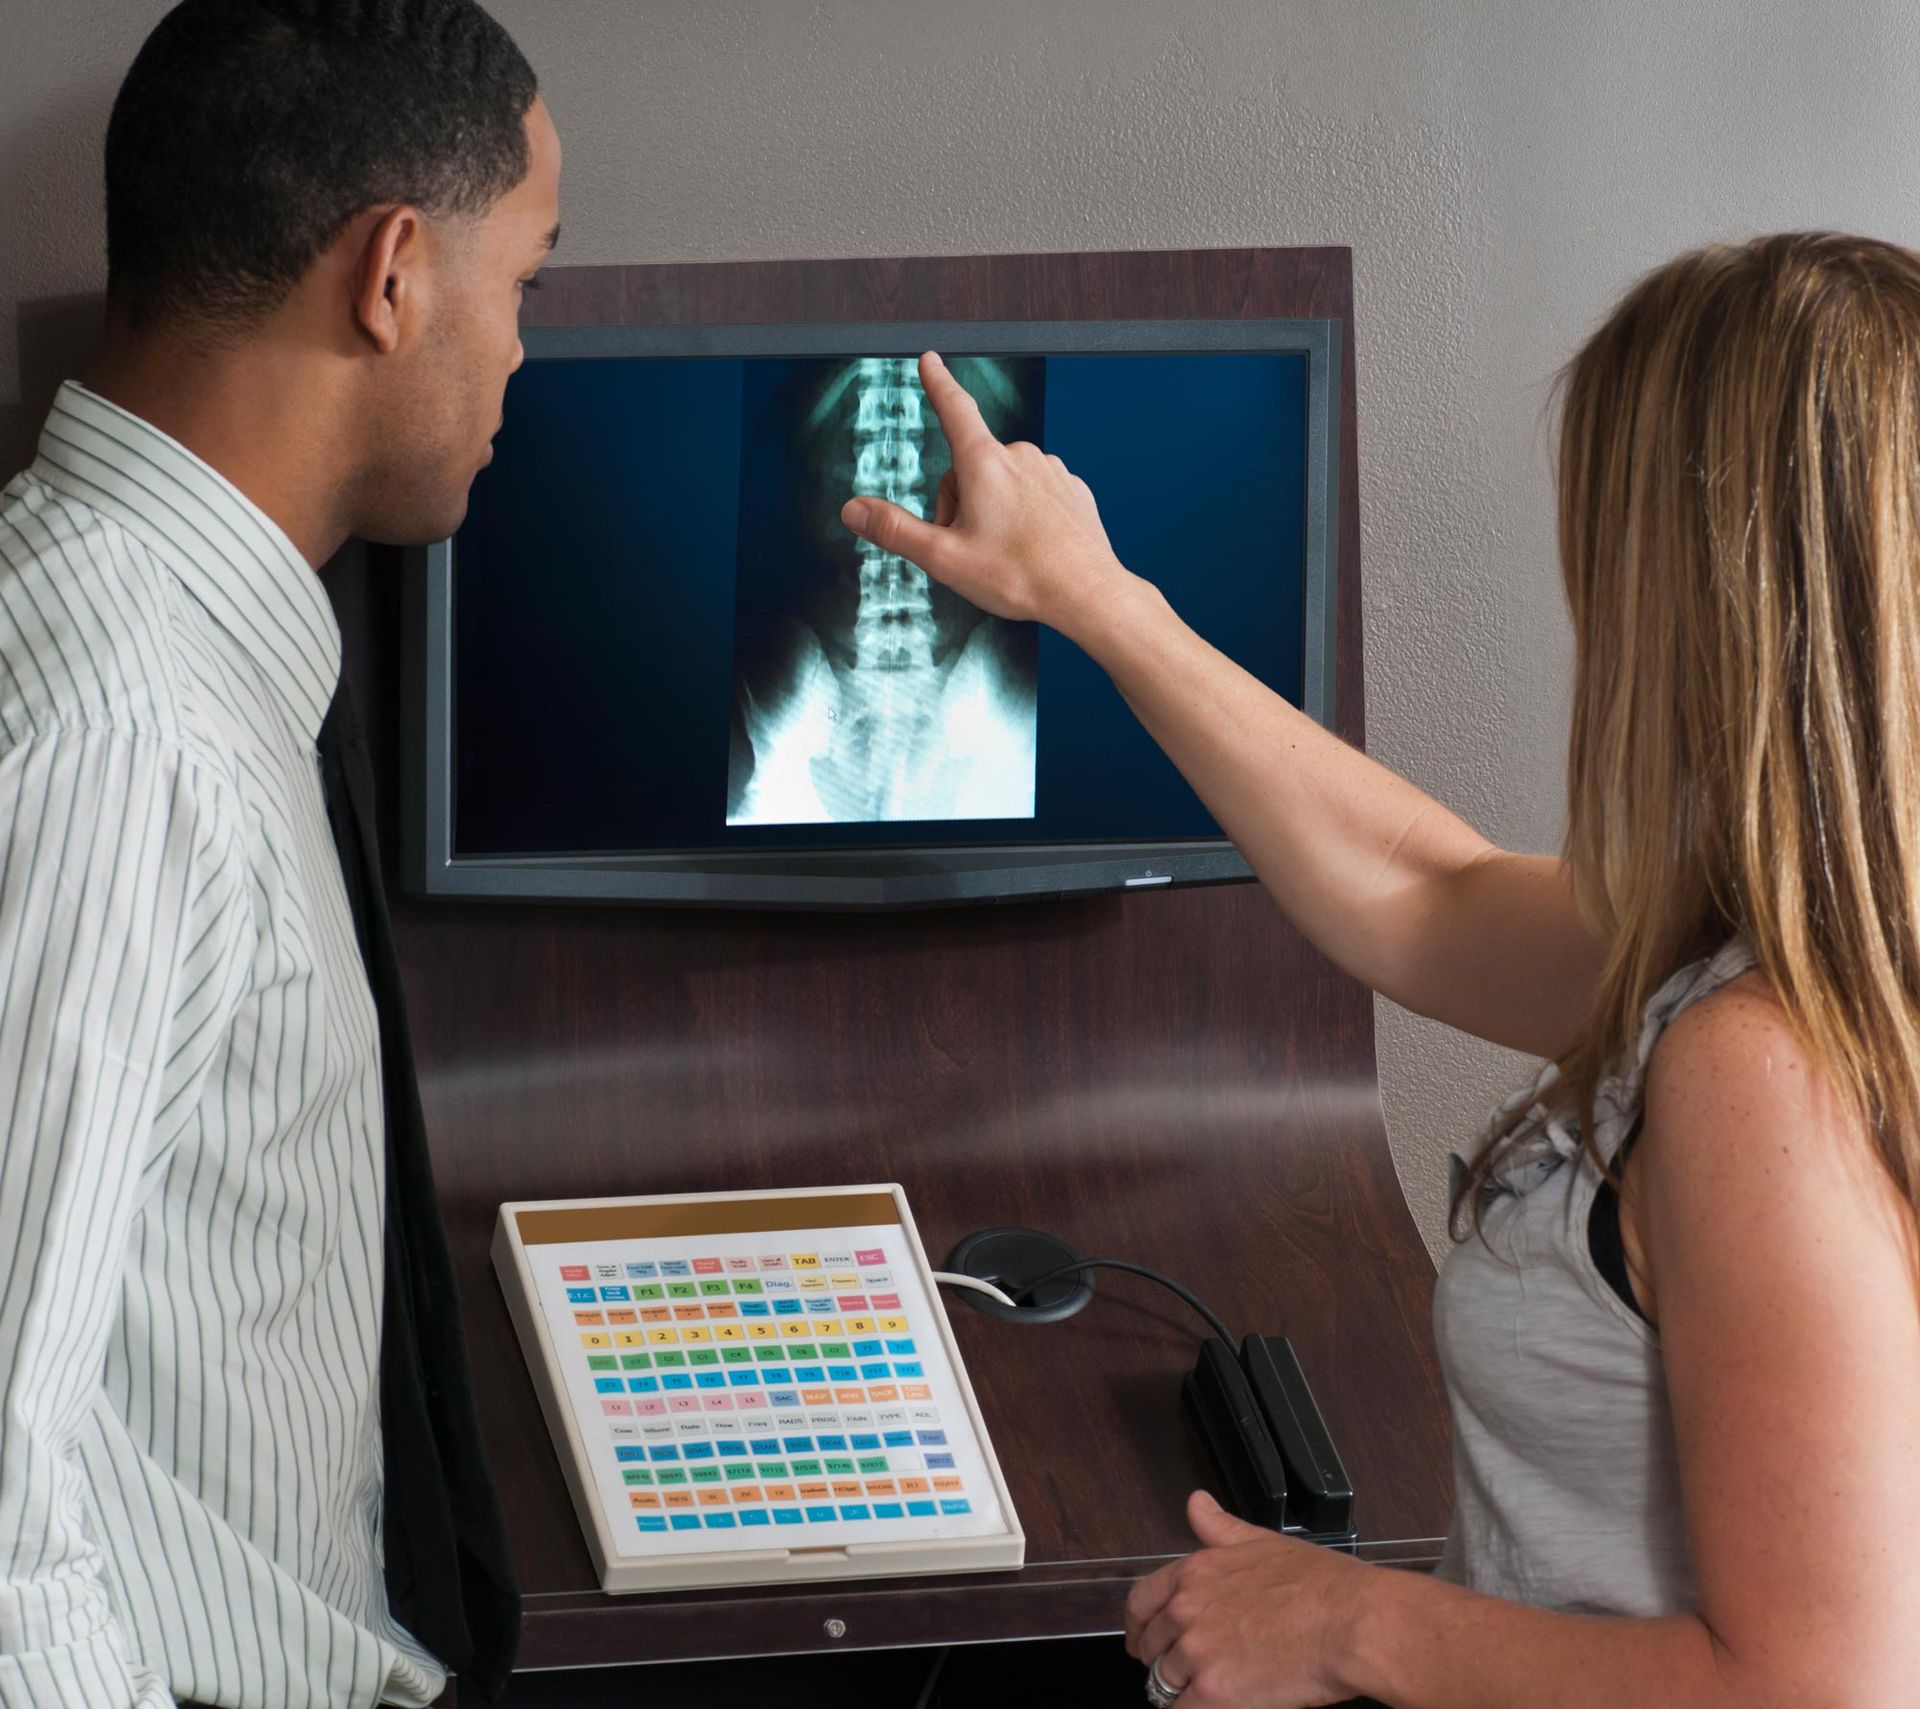 Showing X-Ray To Patient — Etowah, NC — Huskey Chiropractic Center